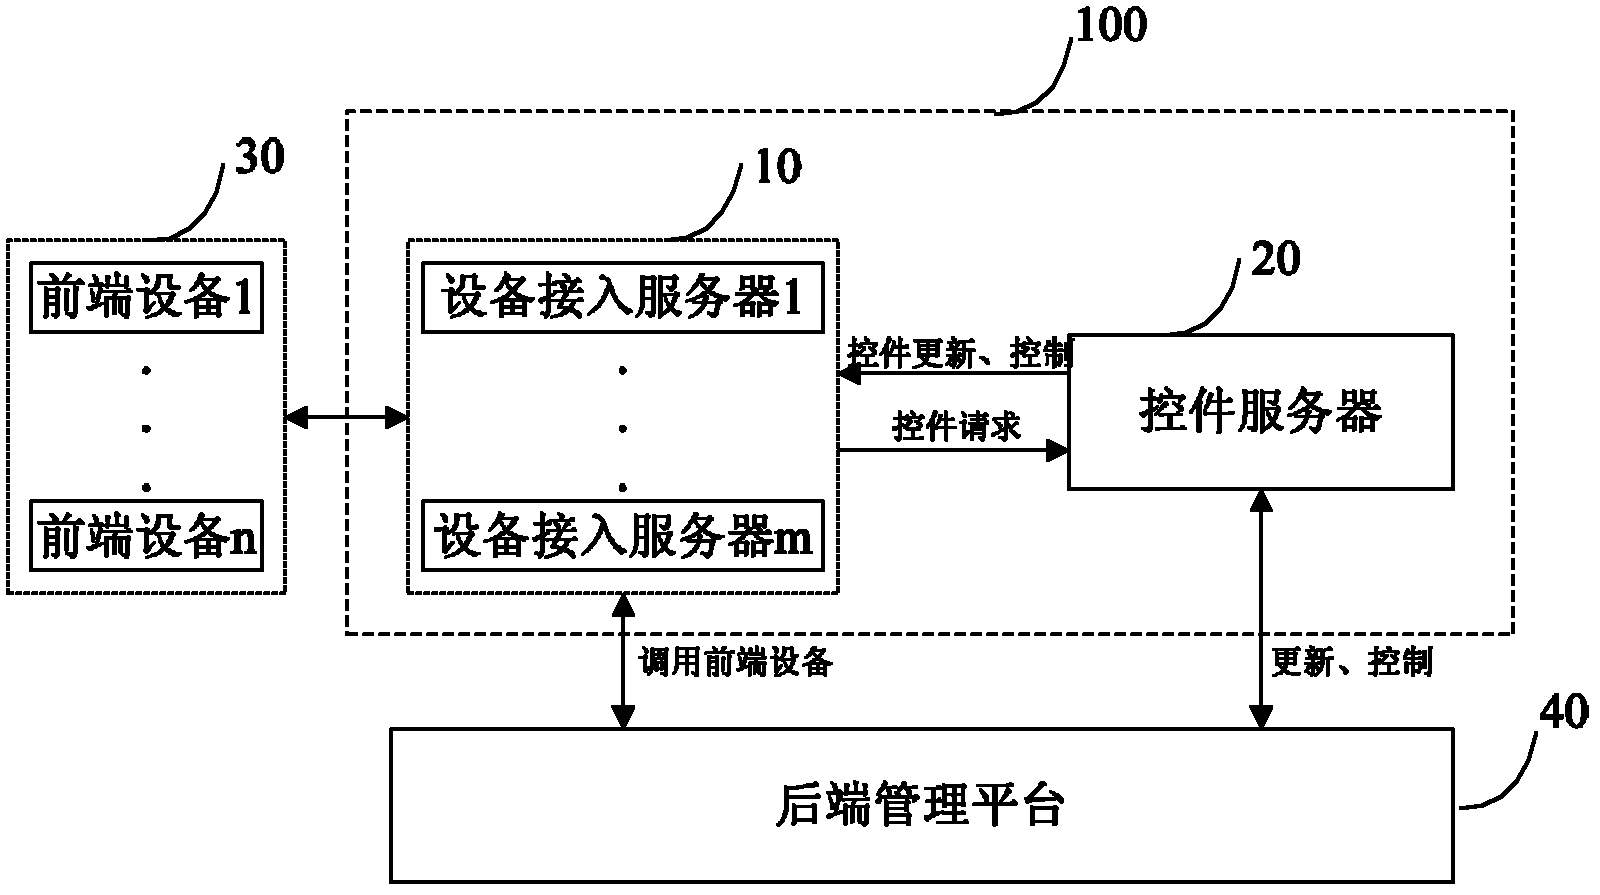 System and method for control and automatic update of network video monitoring equipment controls